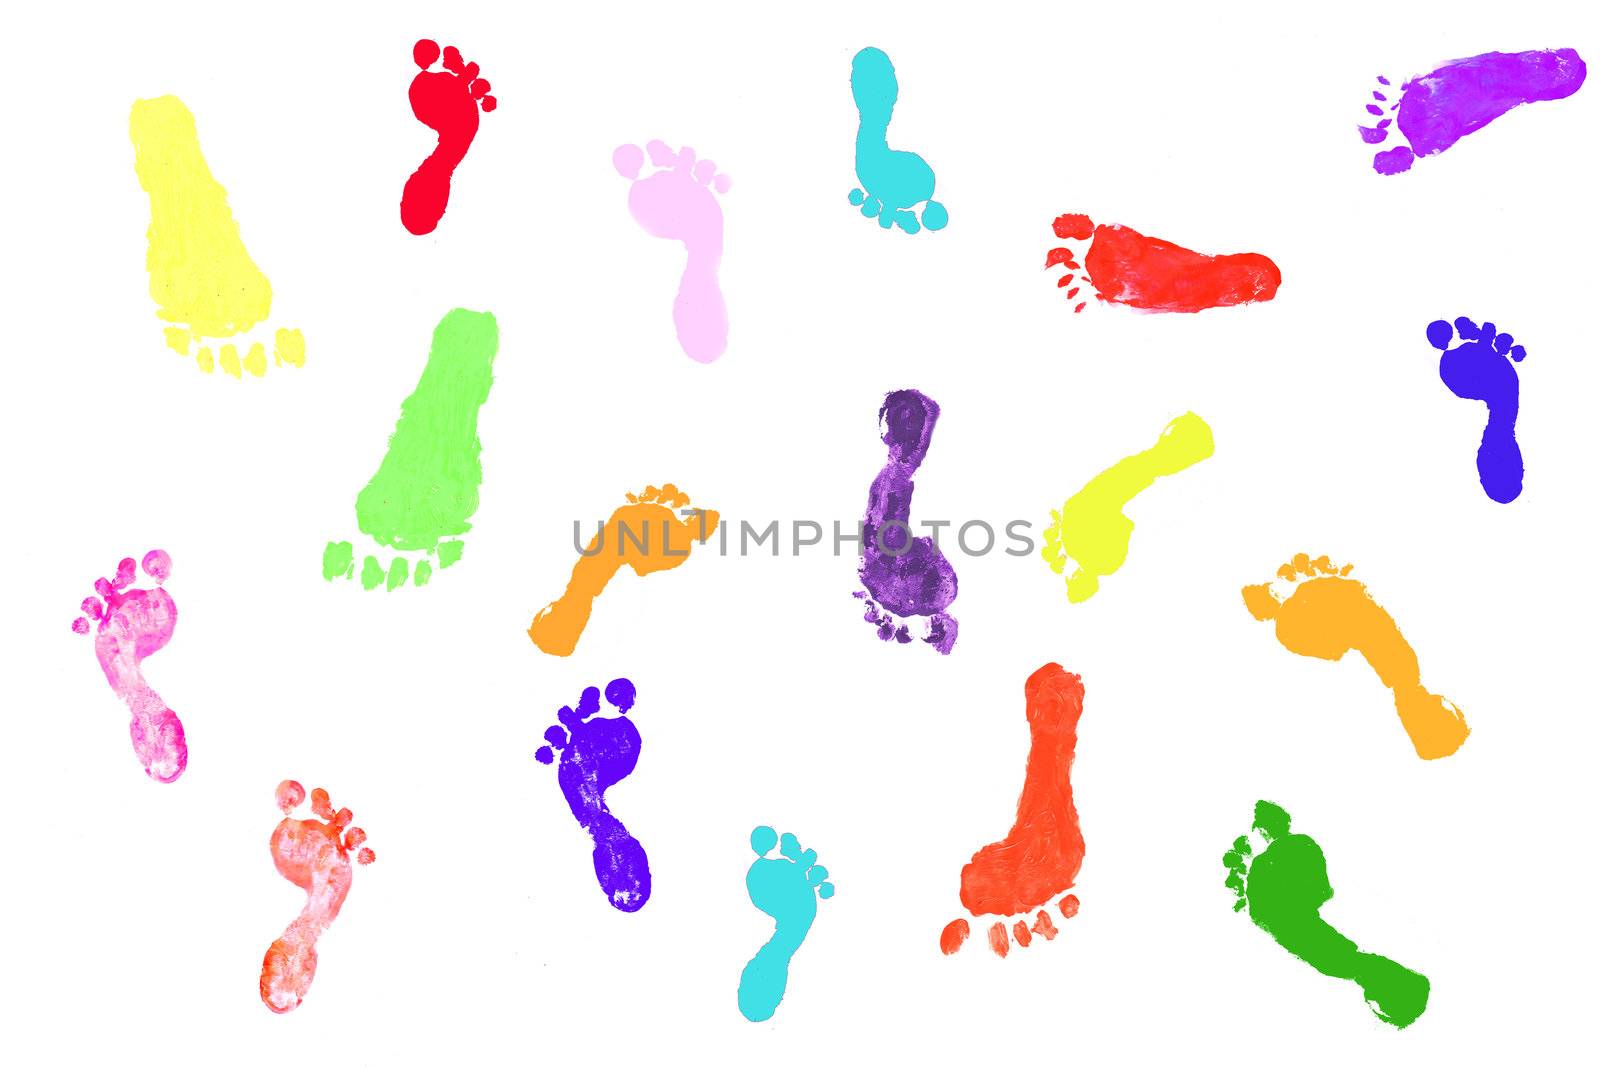 Actual children's footprints in paint on white background